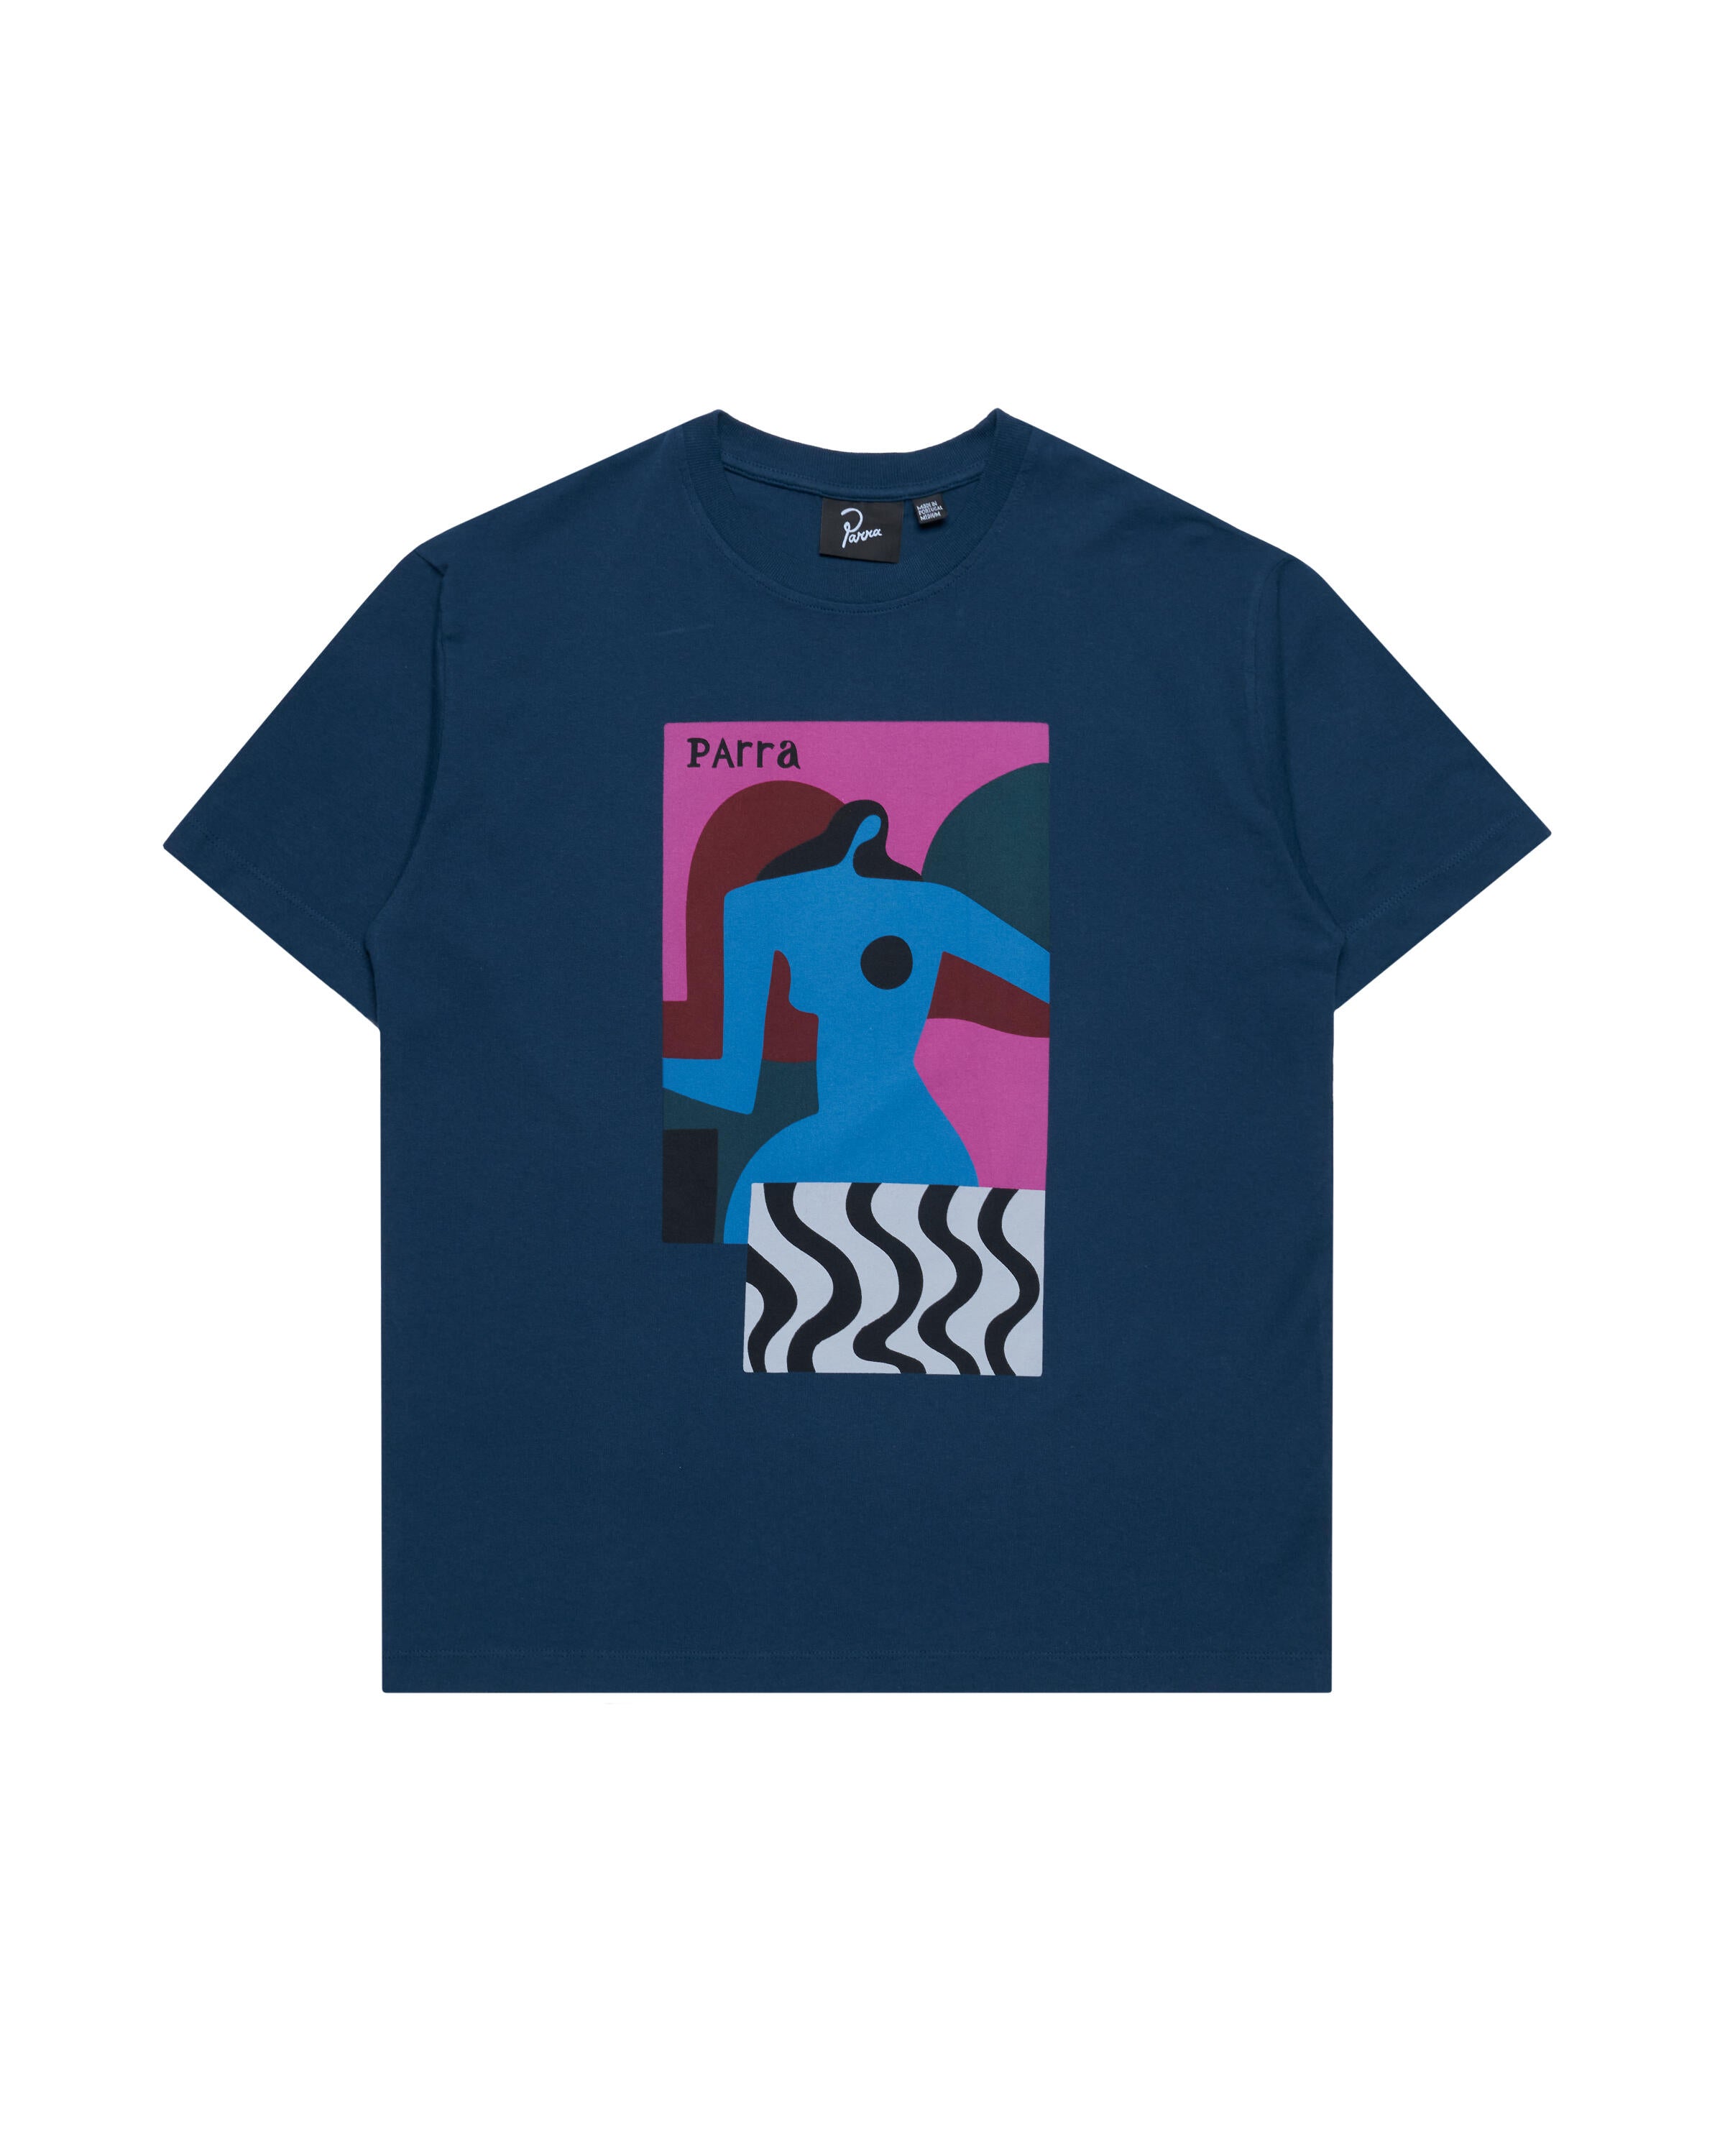 by Parra distortion table t-shirt